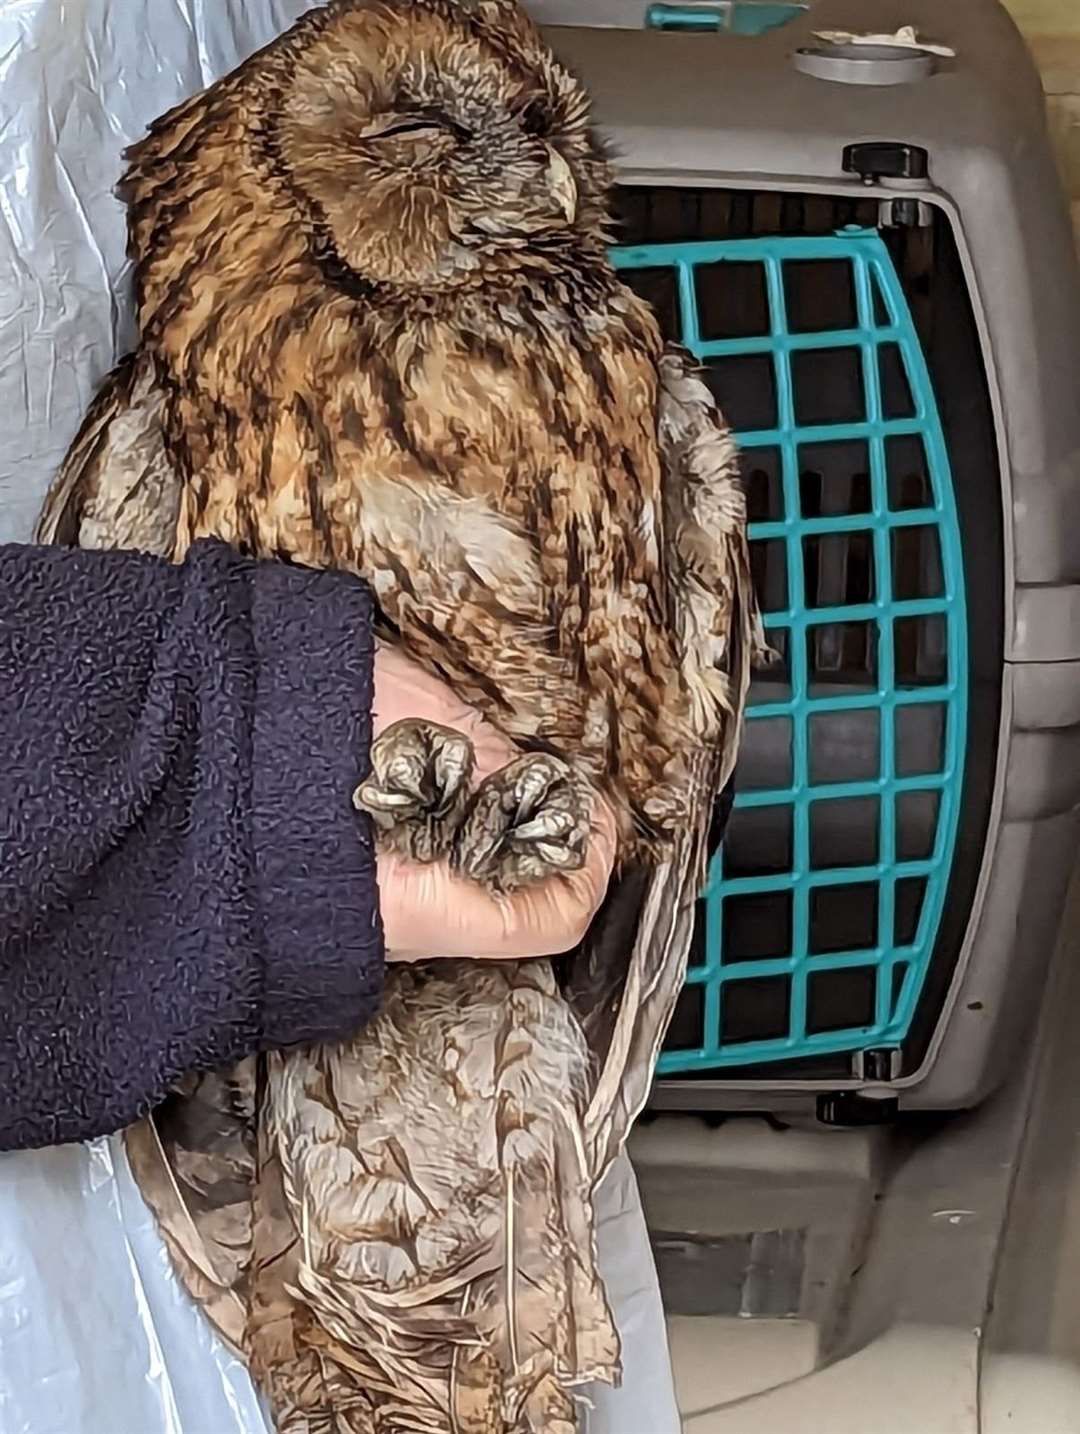 A tawny owl had to be rescued from a woodburner in Penshurst